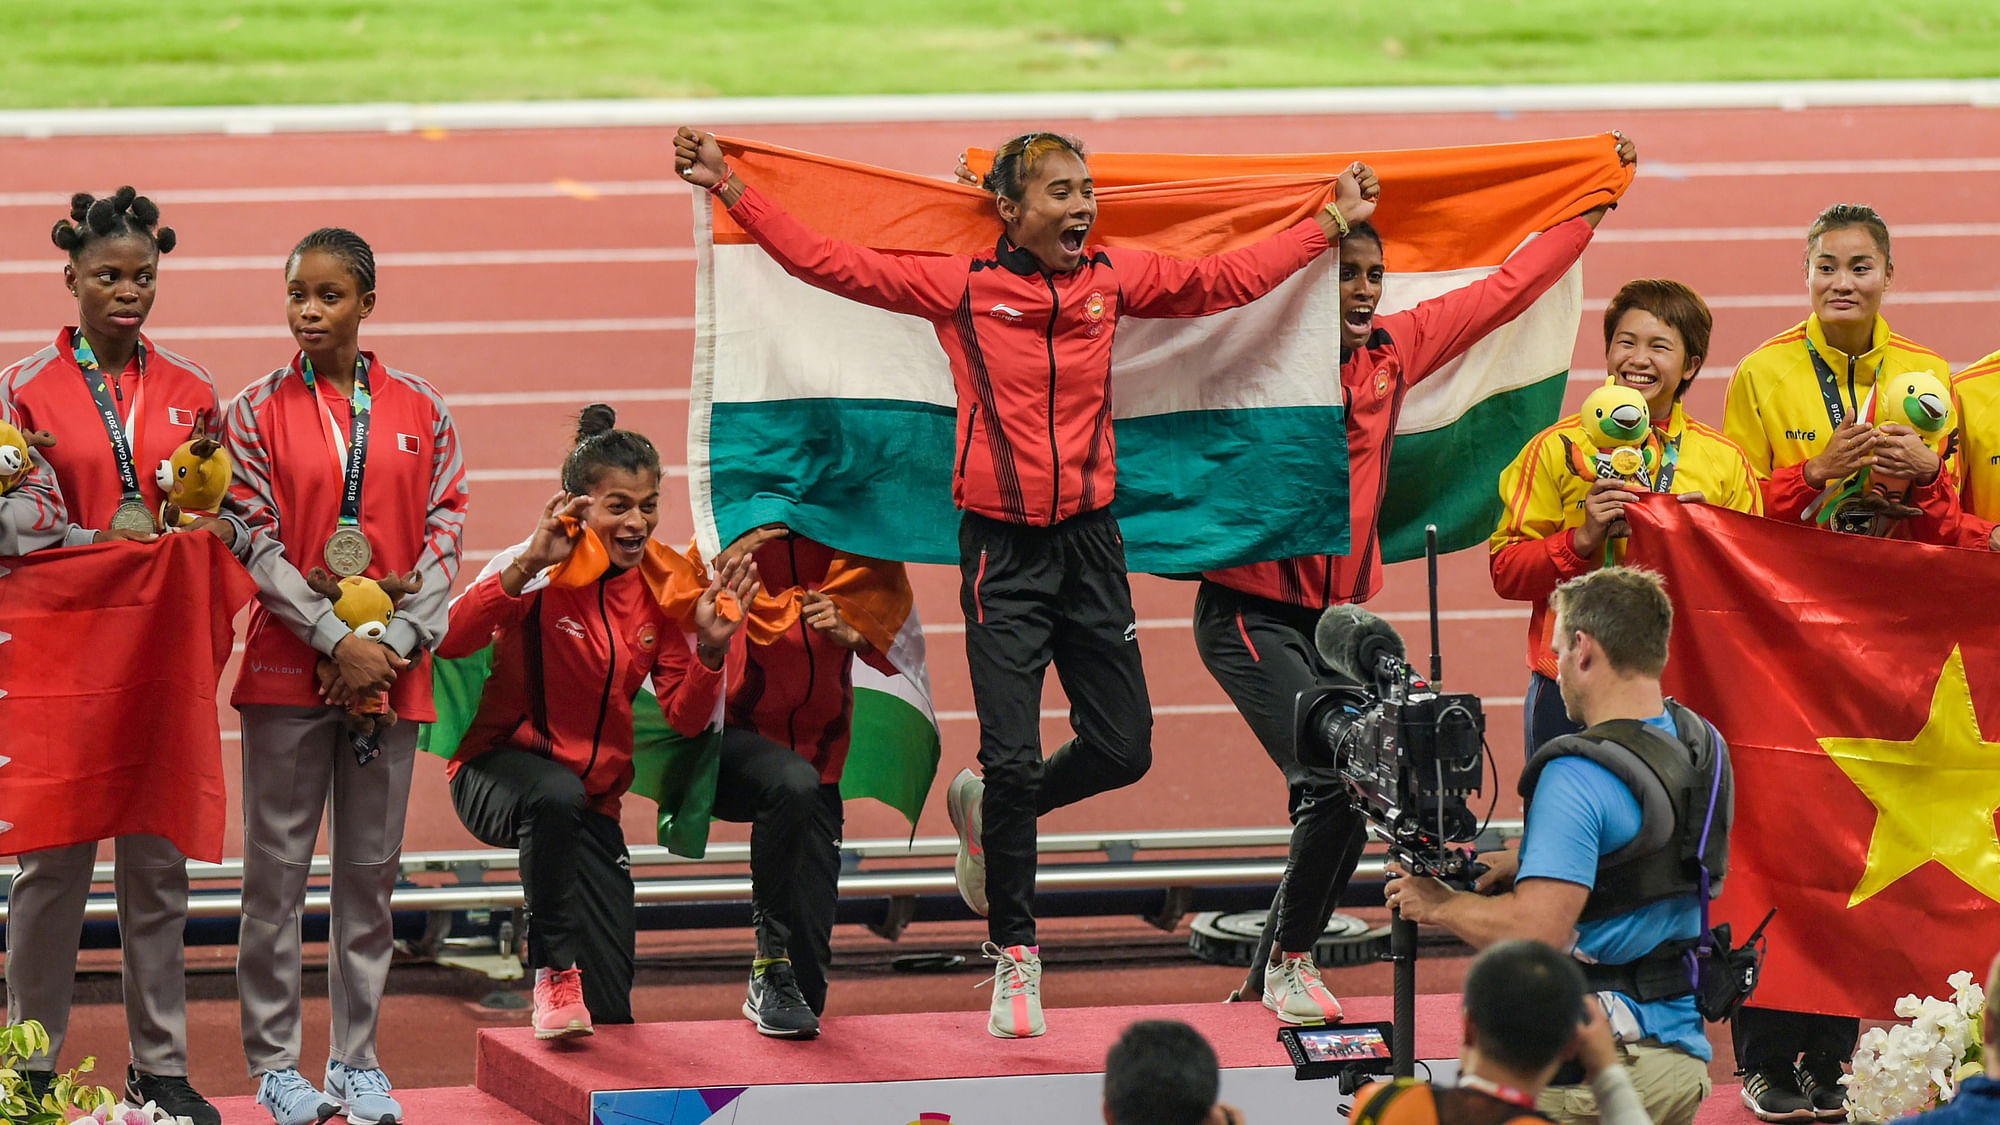 Indian women’s 4x400m relay team celebrate on the podium with their gold medals.